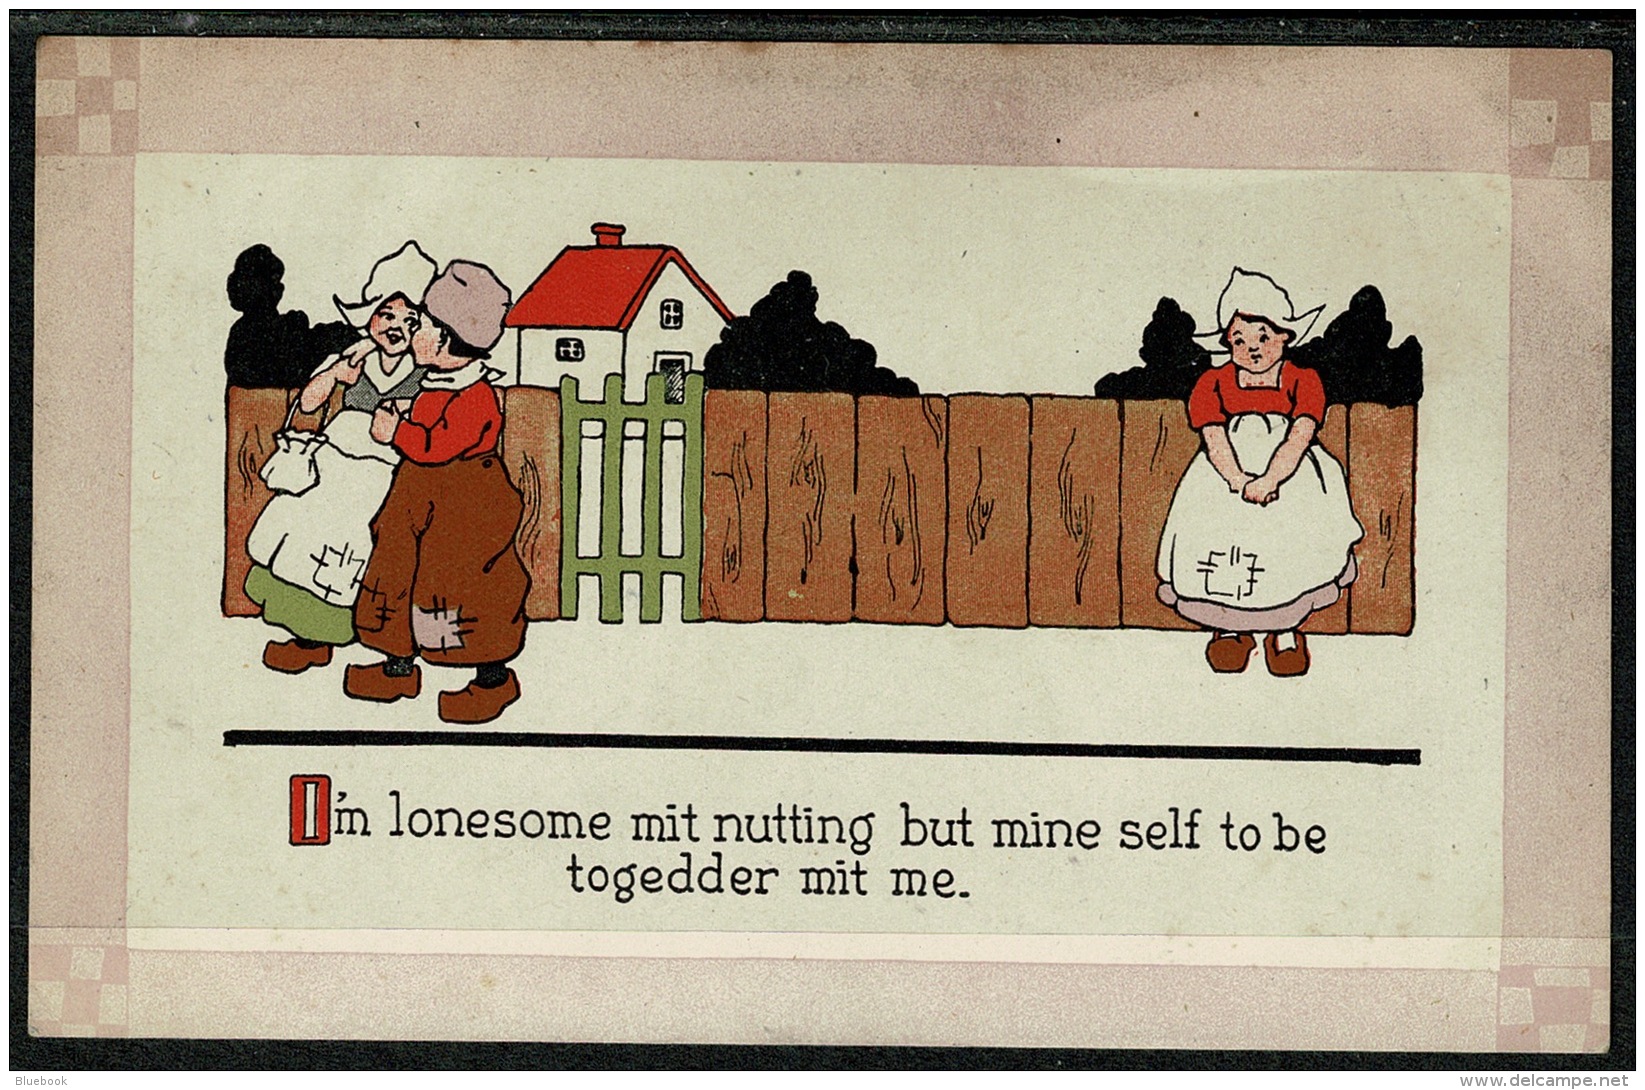 RB 1218 - Early A. Davis Message Postcard - "O'm Lonesome Mit Nutting But Mine Self To Be Togedder Mit" - Holland Theme - Comics